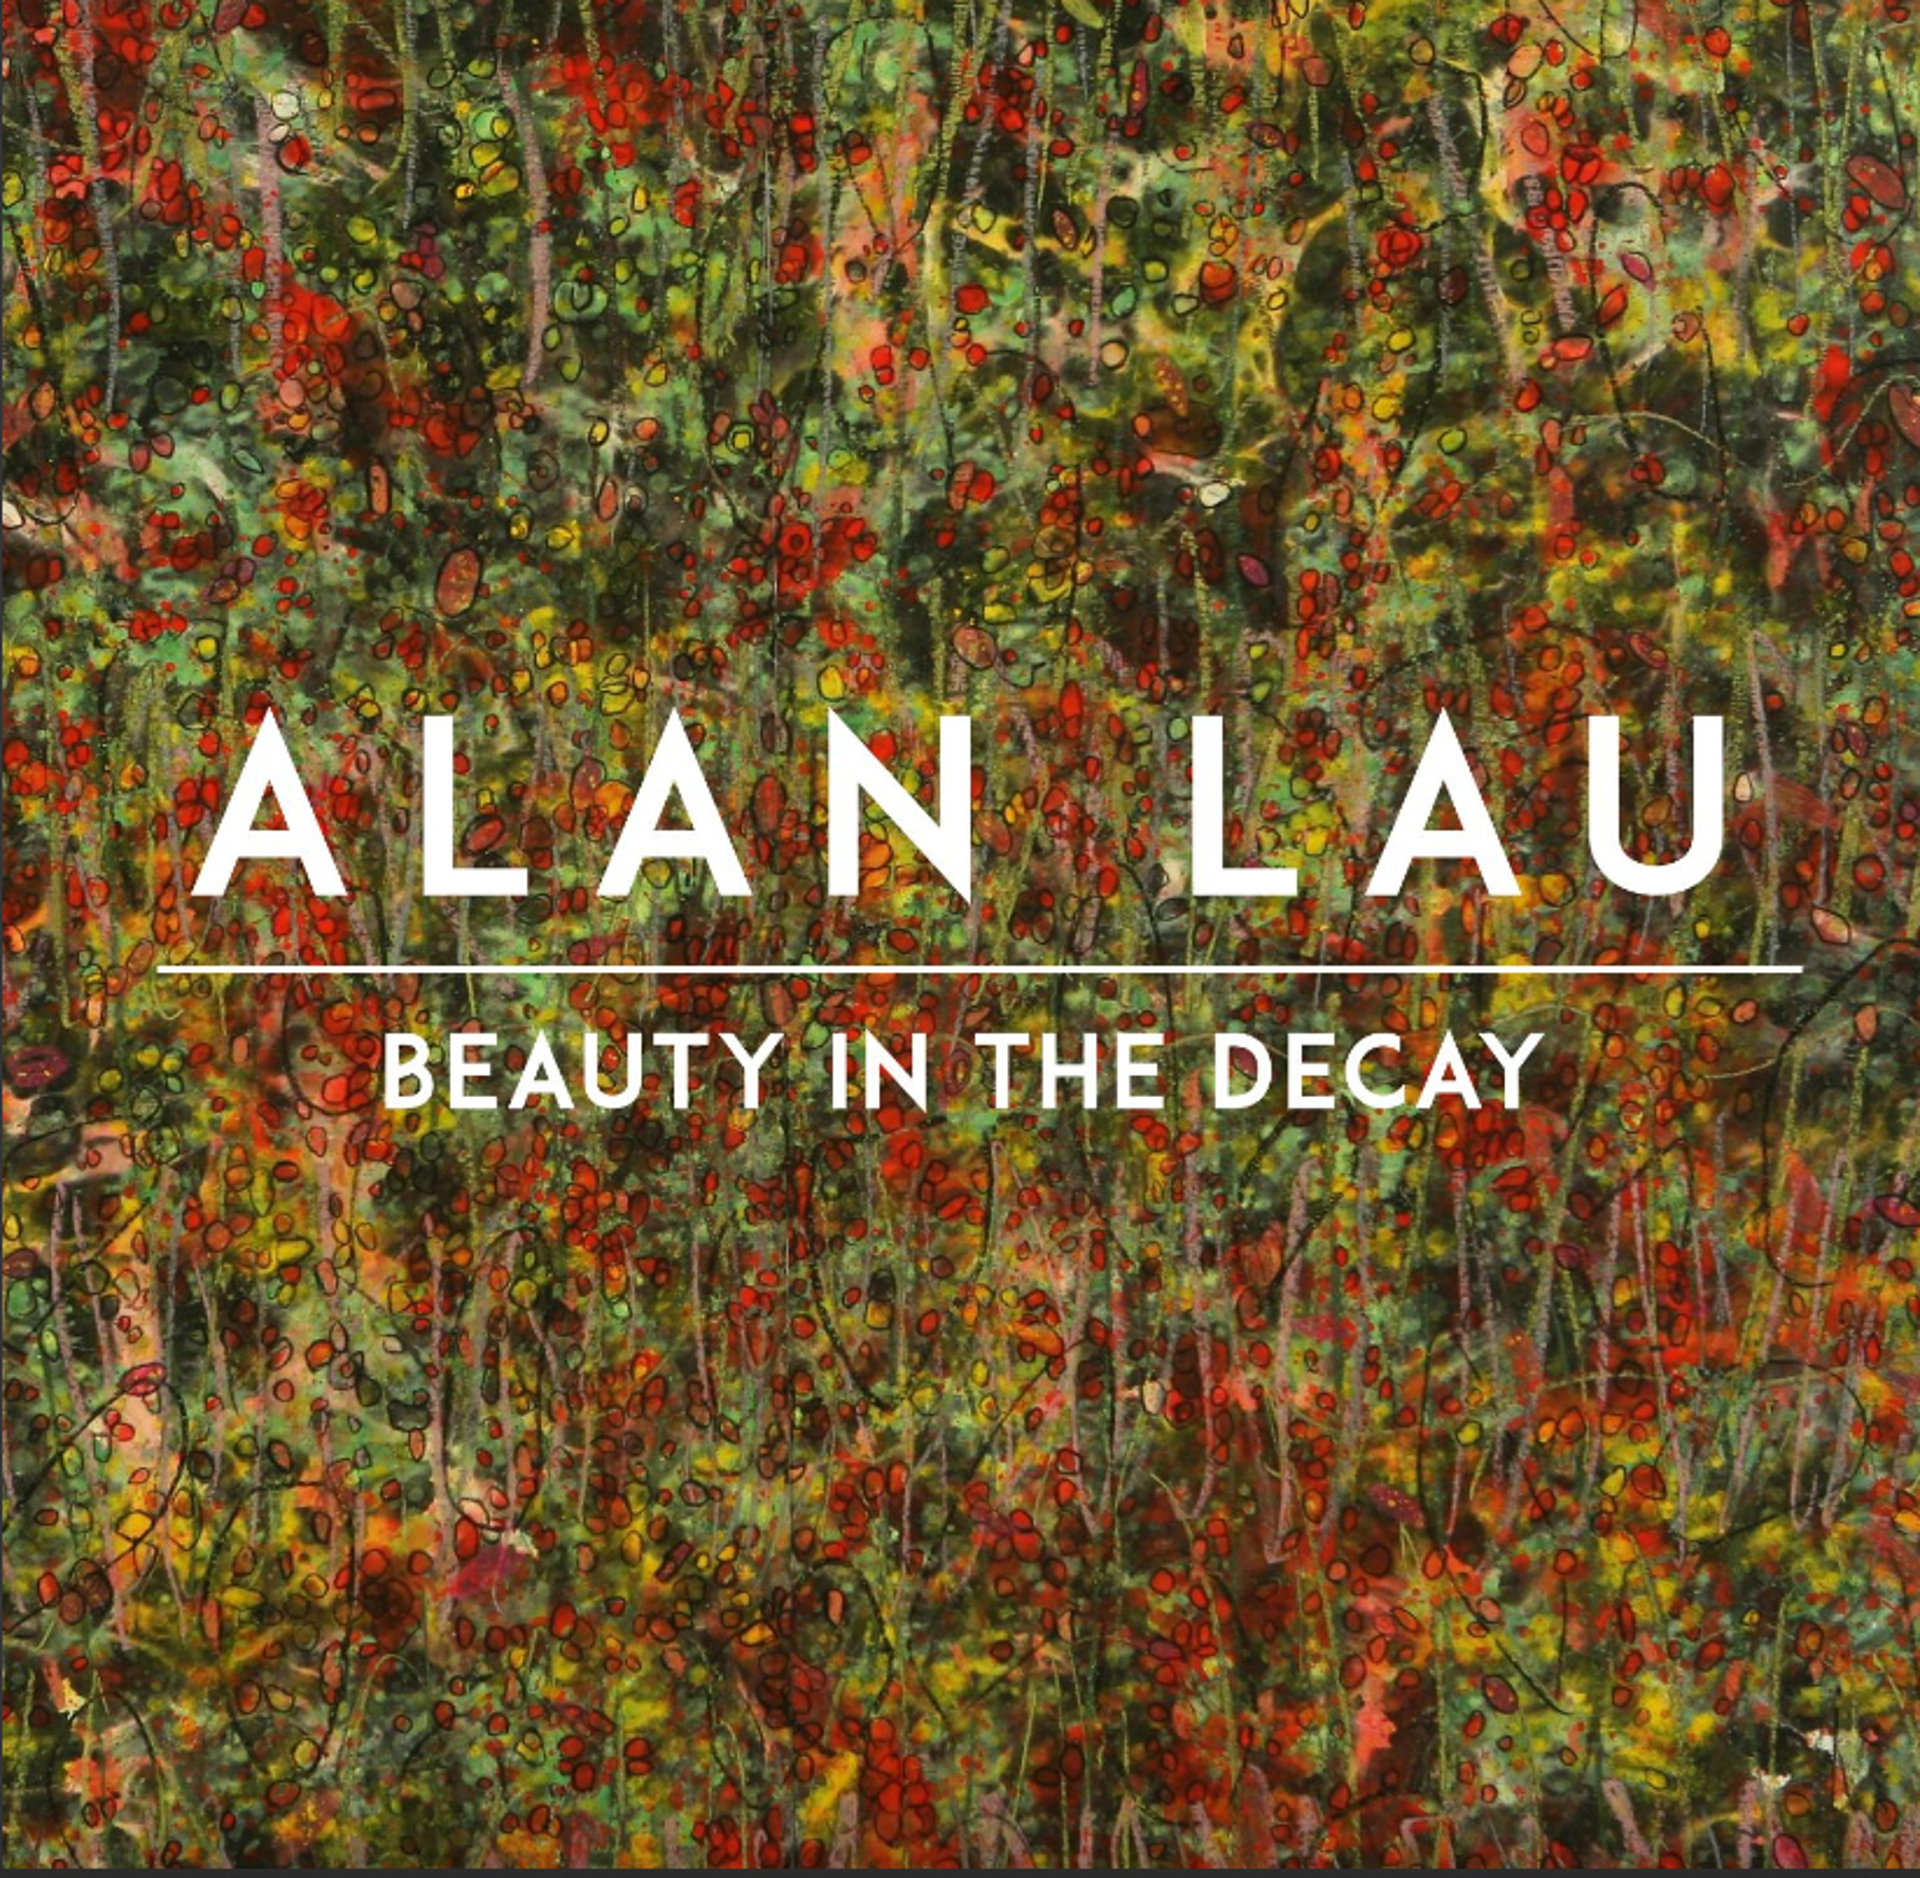 Beauty in the Decay | exhibition catalog by Alan Lau